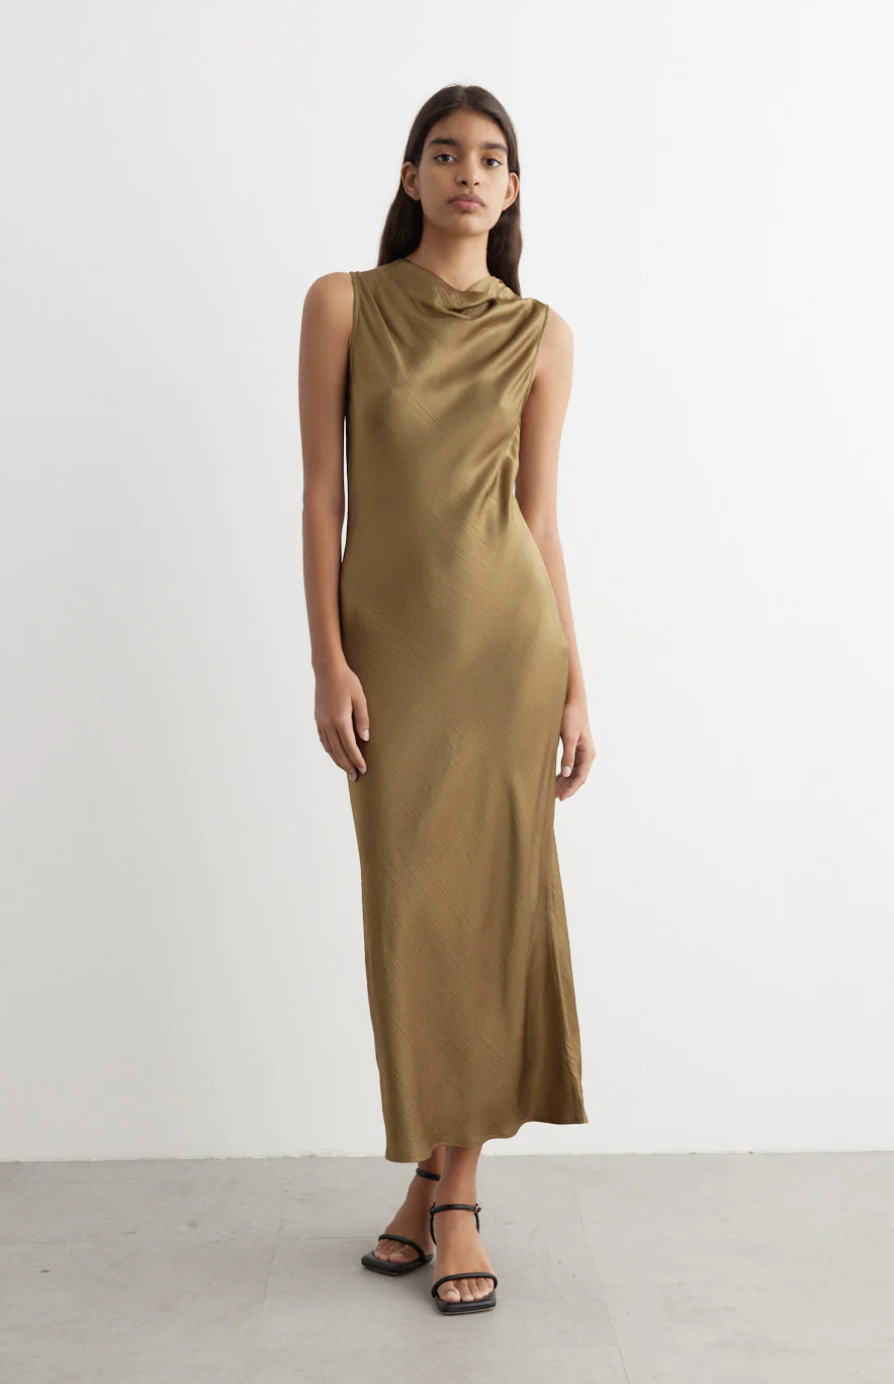 Incu Collection - Infinity Cowl Neck Dress (resale)